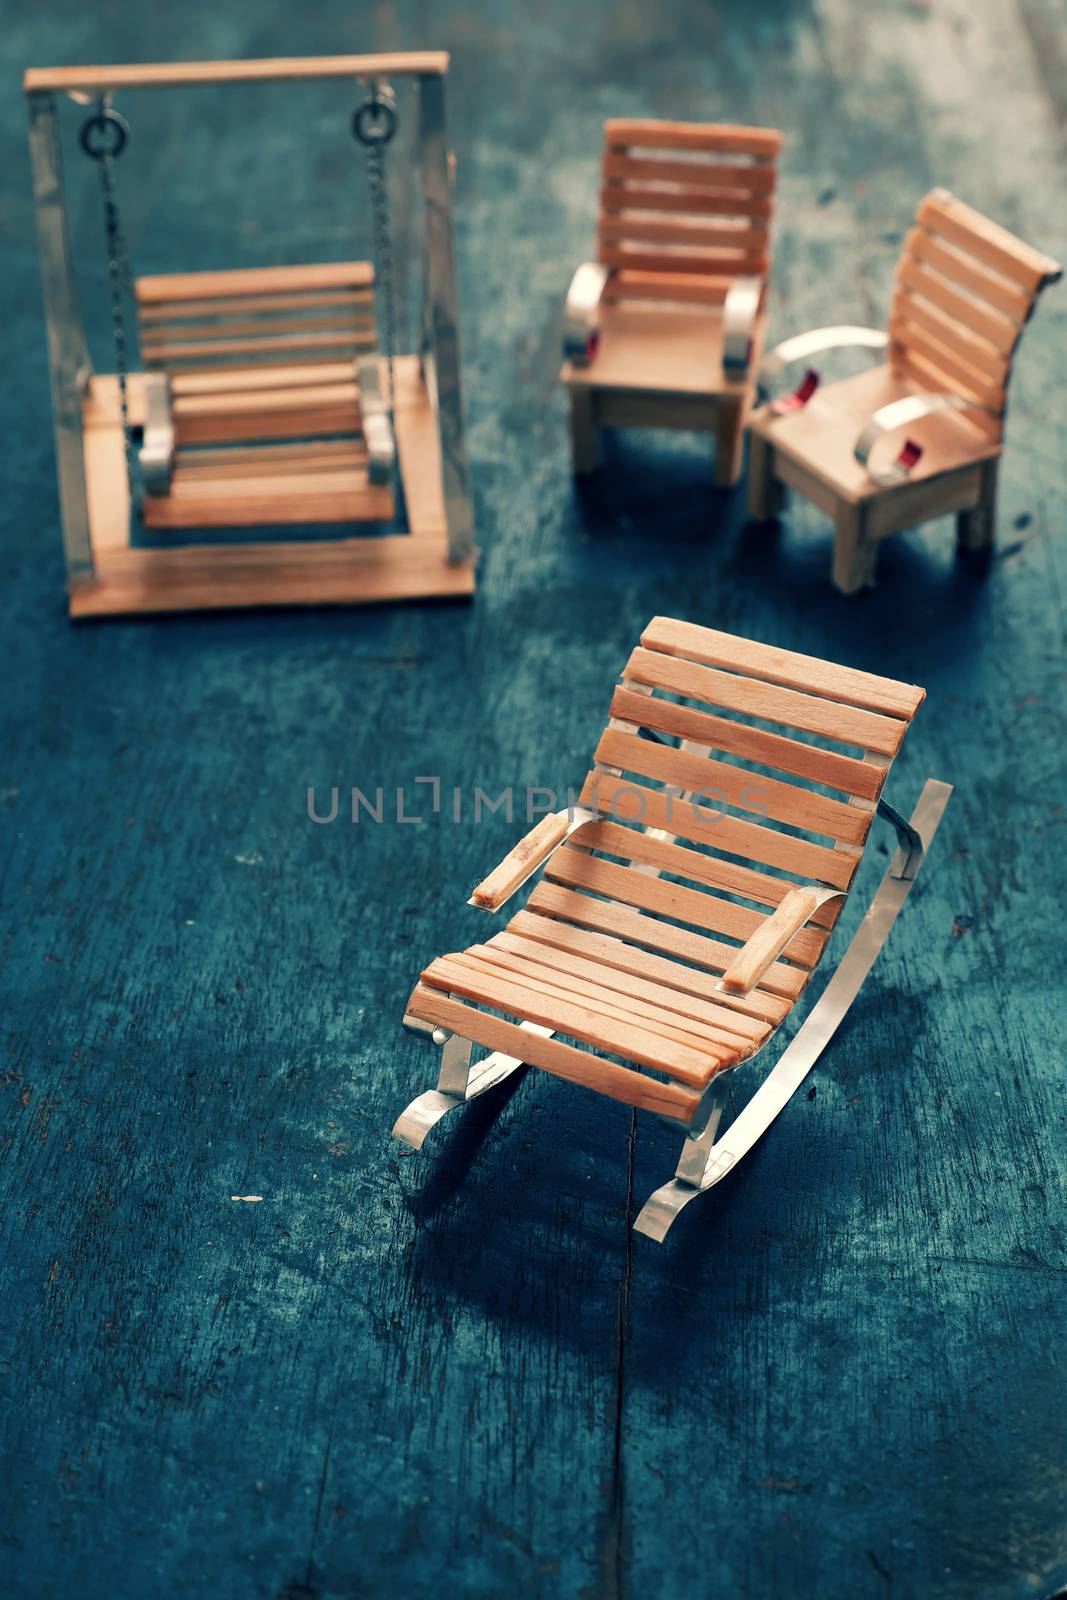 Amazing miniature handmade product for interior design, mini furniture make from wood stick on wooden background, small chair so cute, a hobby leisure